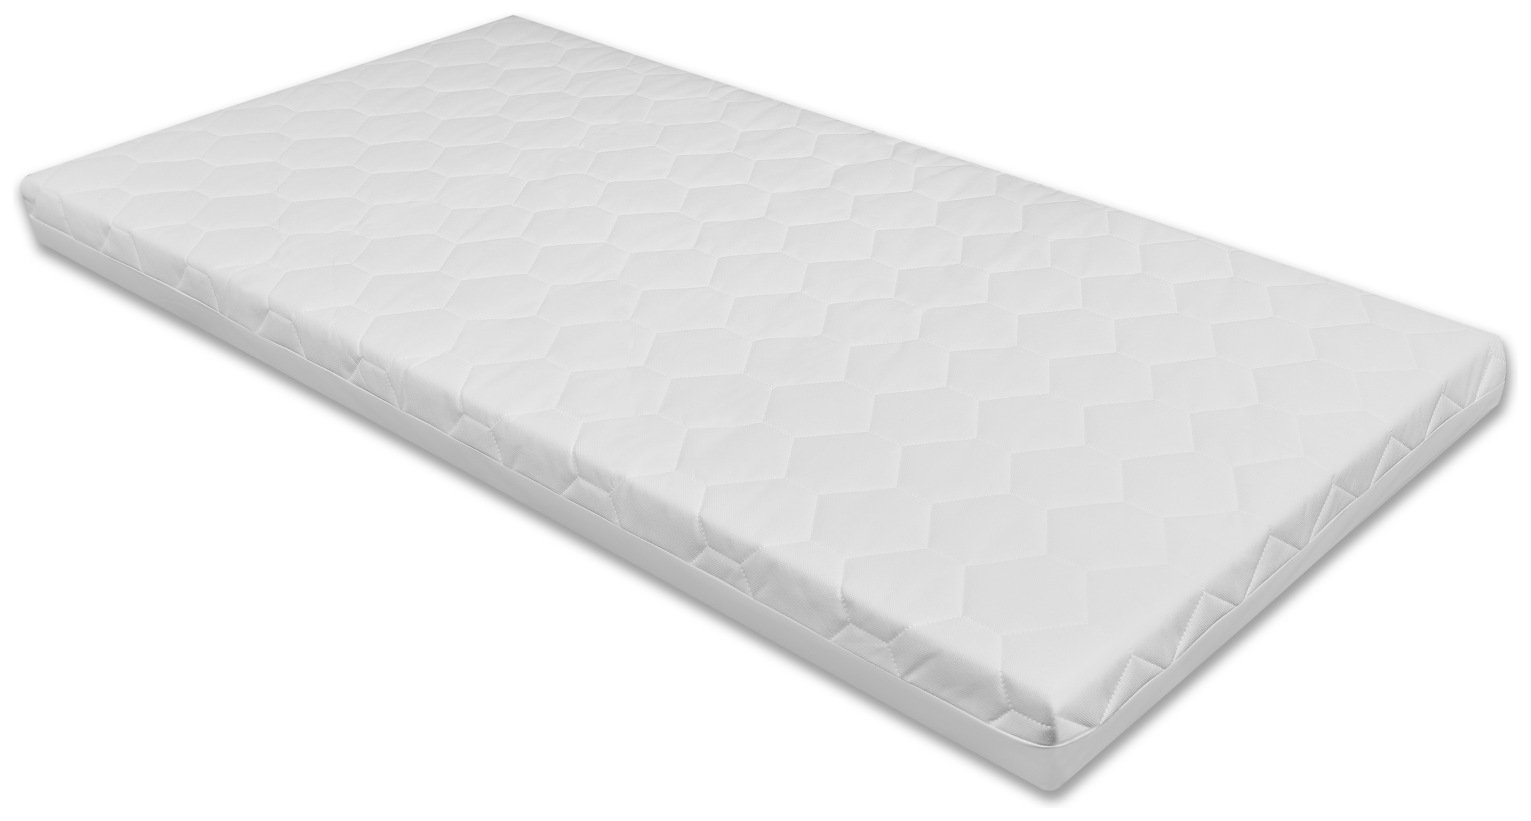 which cot bed mattress